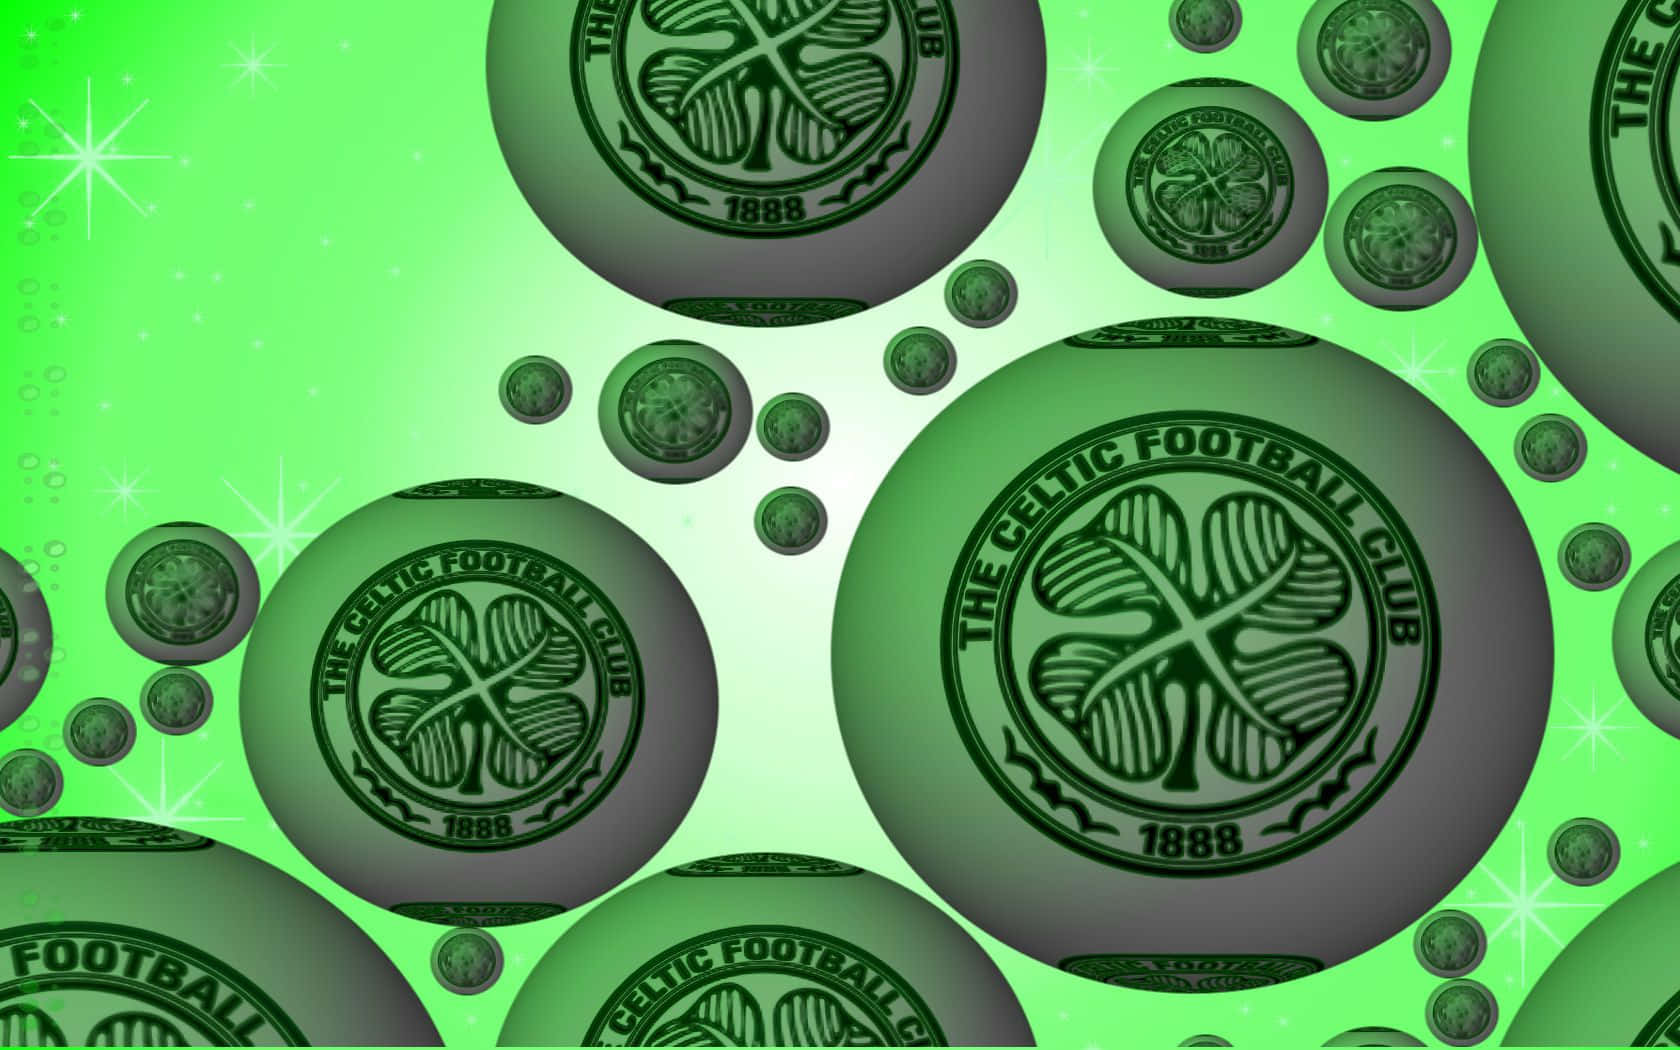 Show your pride by wearing Celtic FC's iconic green and white. Wallpaper